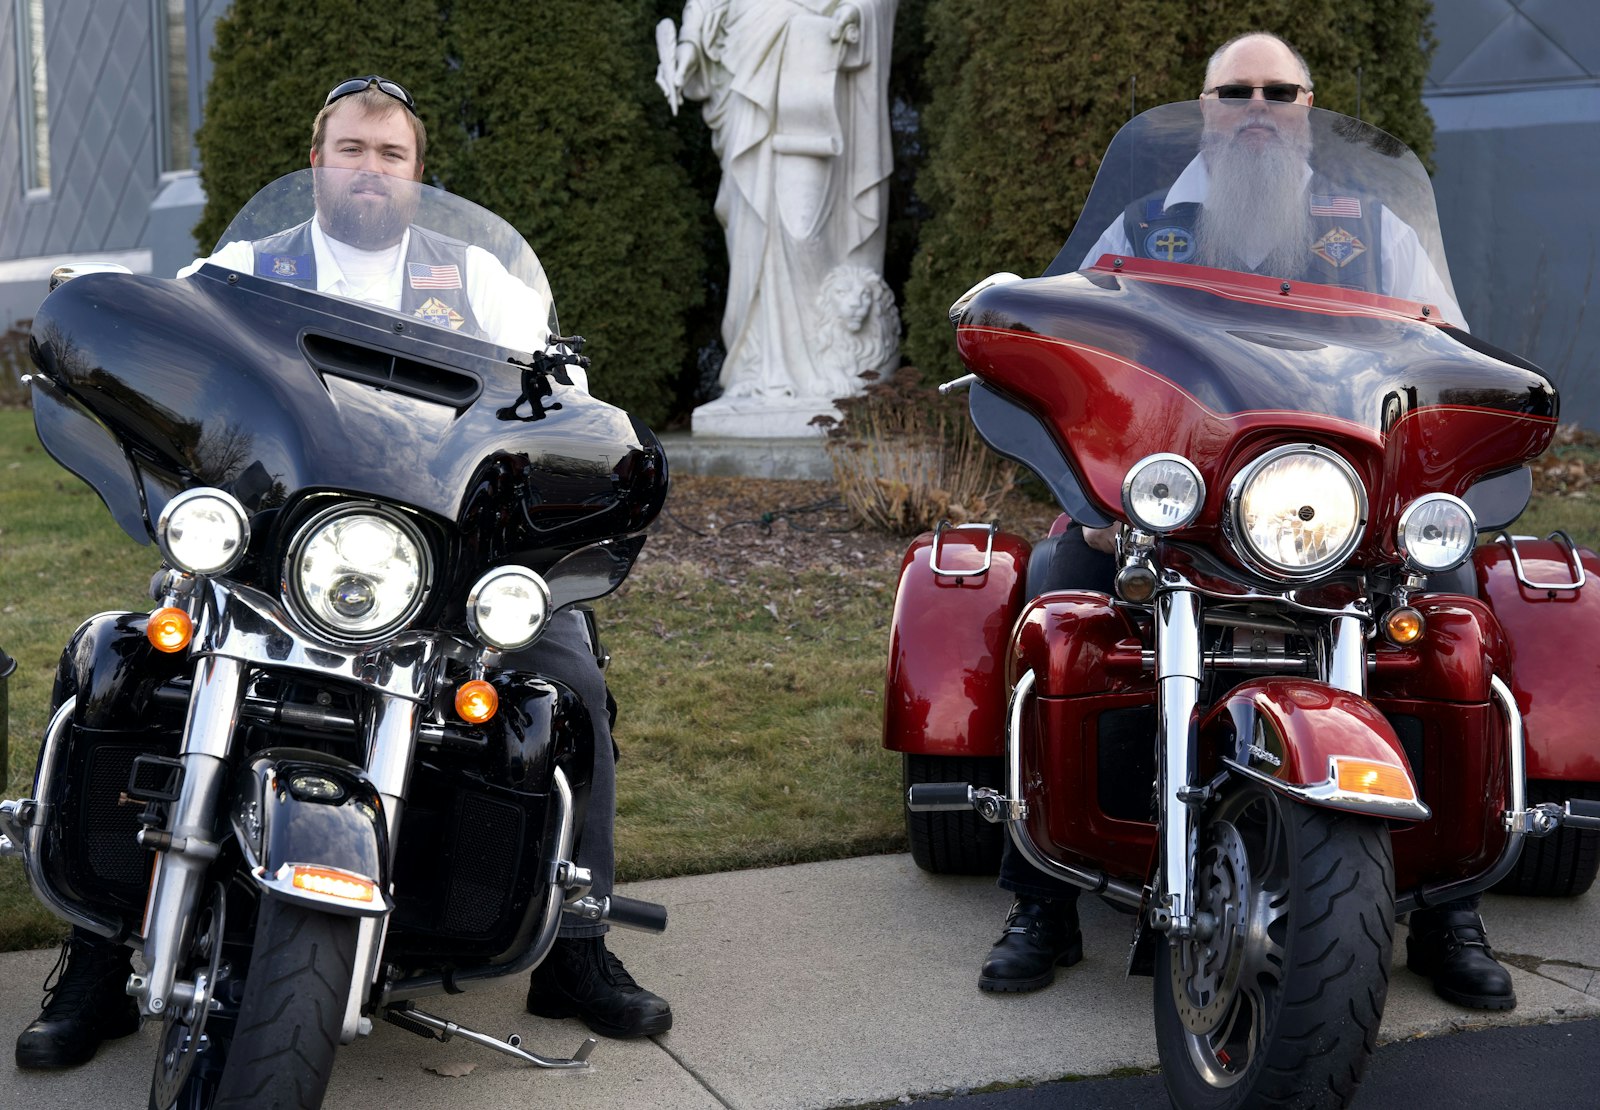 James Kubinski, left, and his dad Brian Kubinski are Knights on Bikes leaders in the state of Michigan. Prior to owning bikes, both father and son were already members of the Bishop Murphy Knights of Columbus Council 3257 in Warren, where they realized many of their fellow Knights also owned motorcycles.